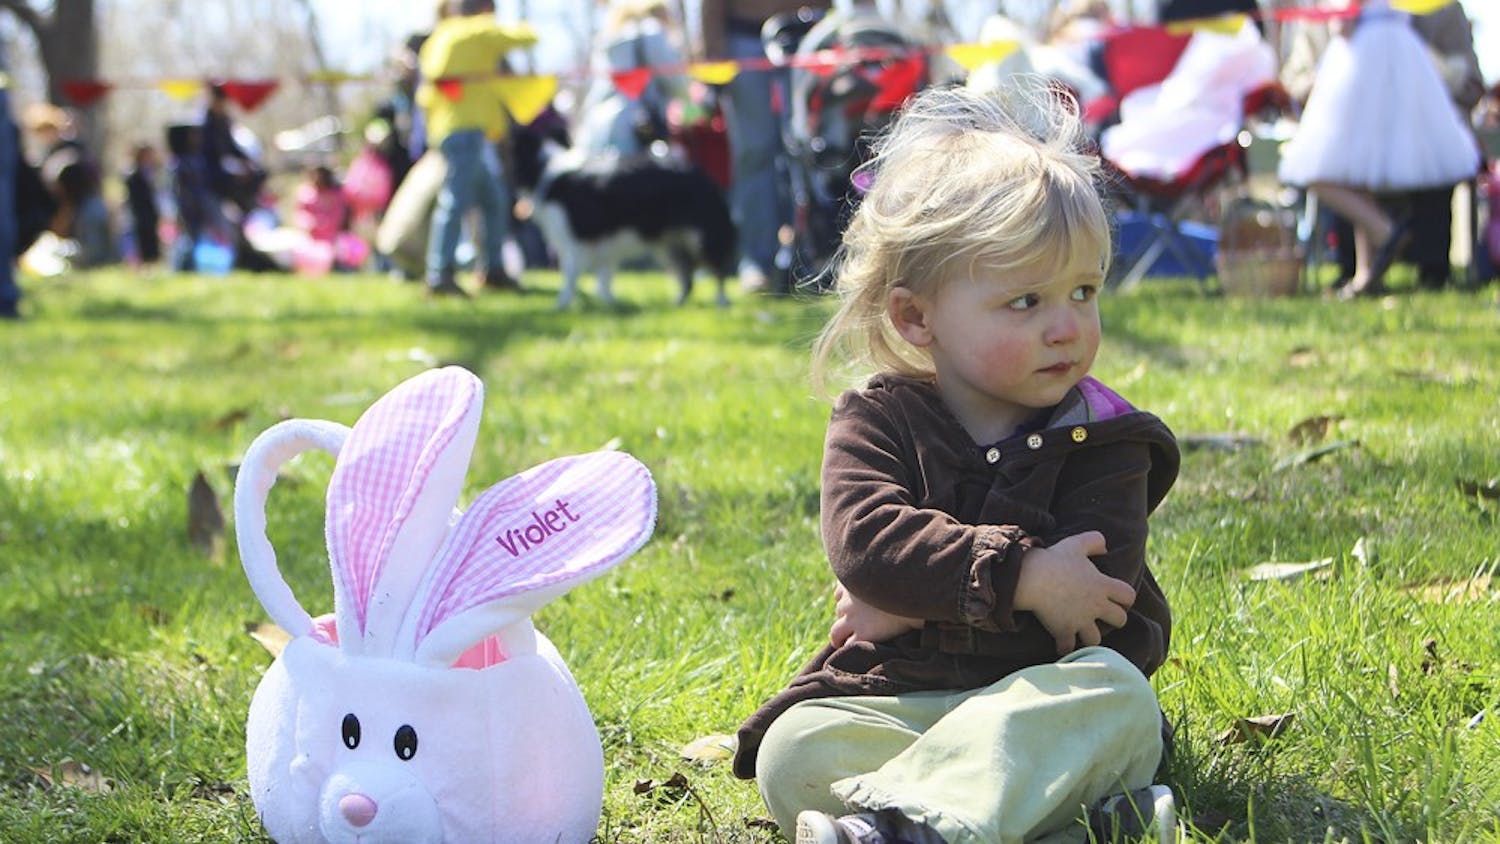 Violet Strickland of Hillsborough sits with her egg basket after the conclusion of Saturday’s egg hunt at River Park in Hillsborough. She found one egg.